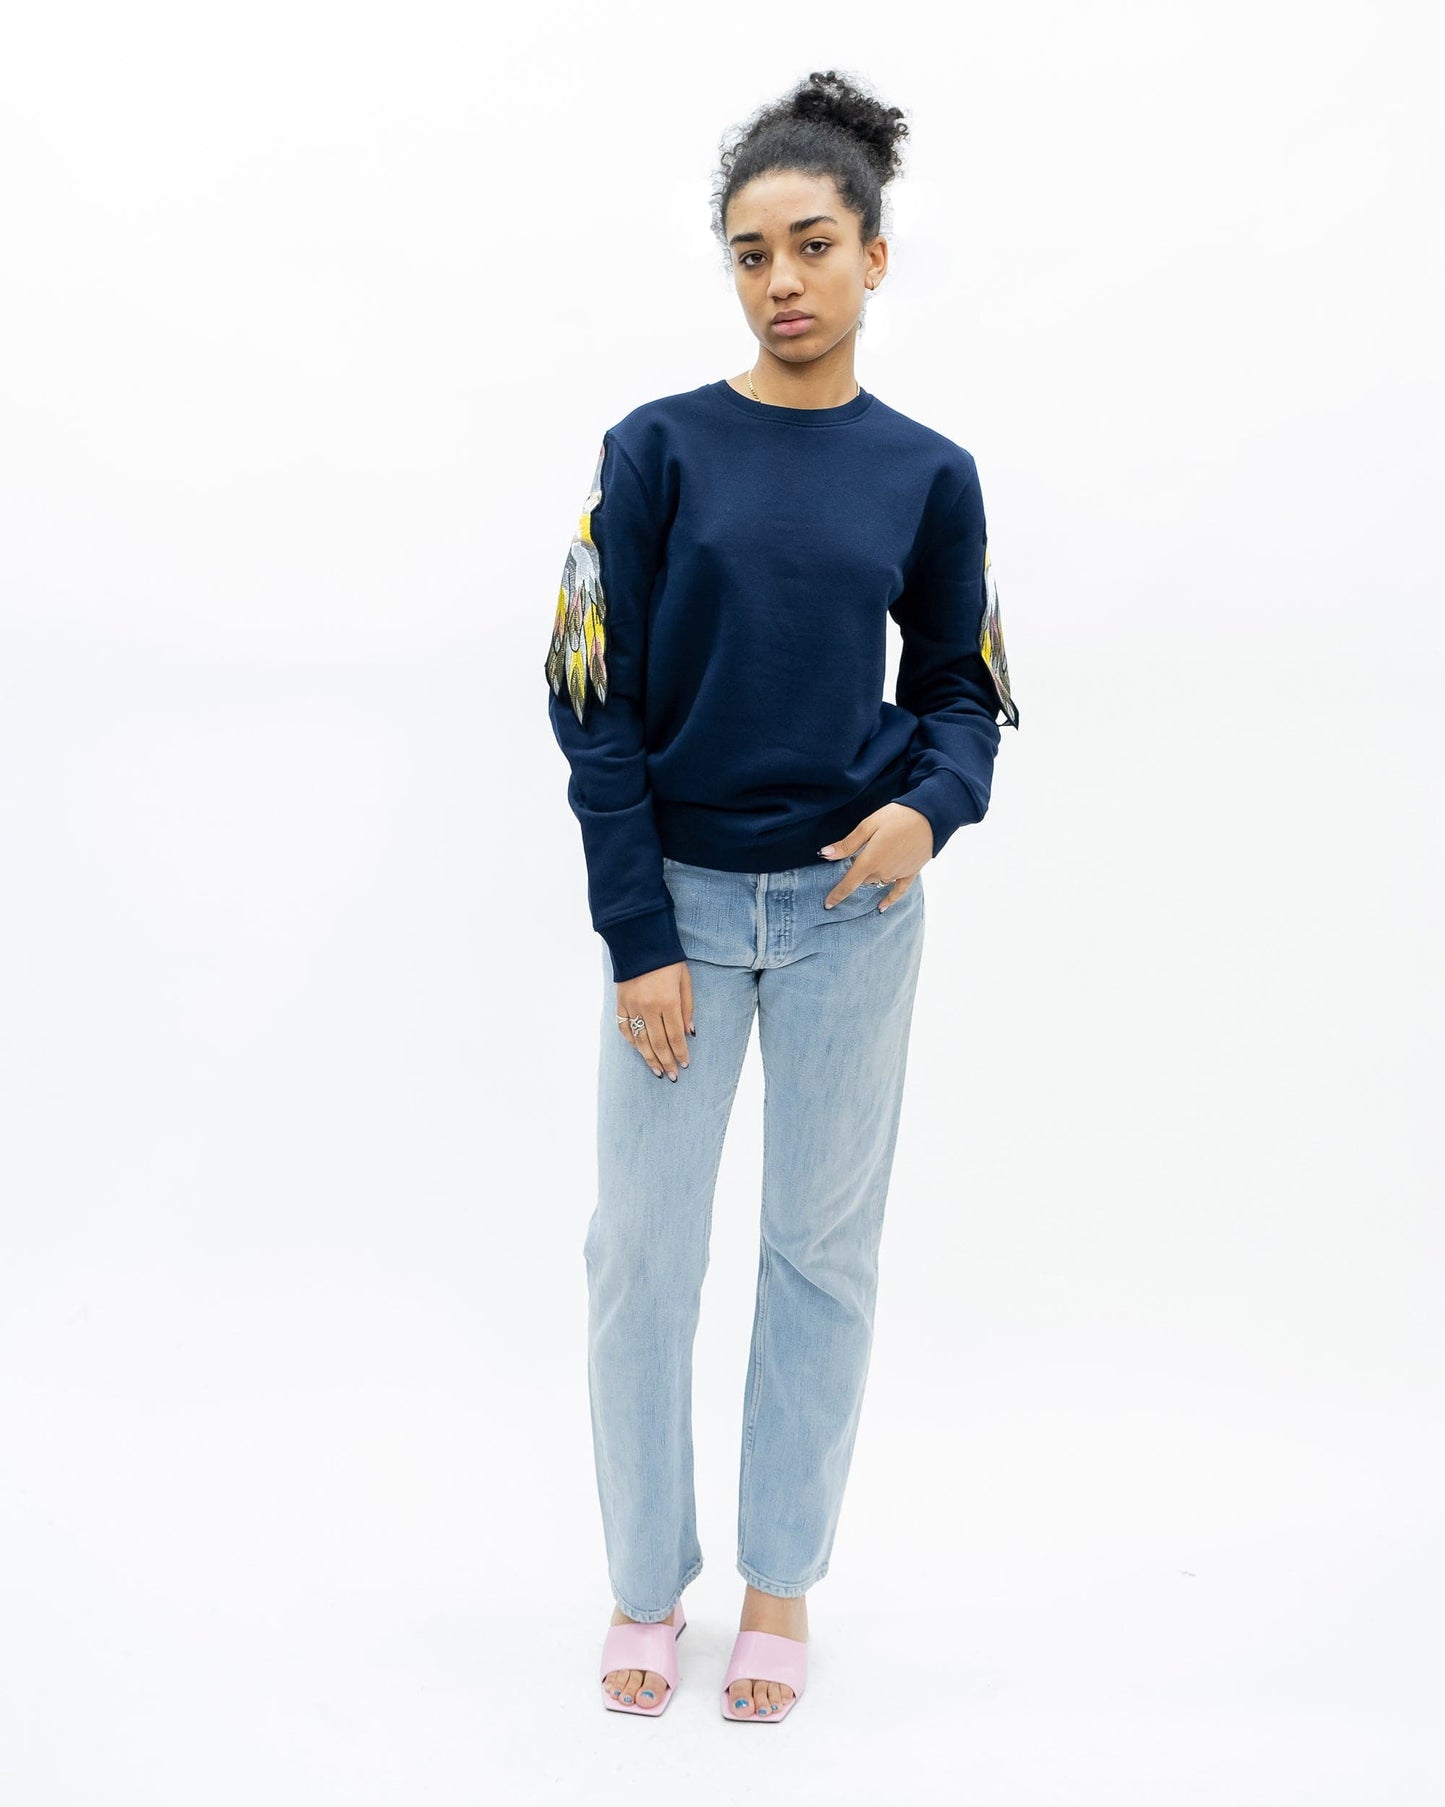 Evergreen - French Navy Parrot Patch Sweatshirt